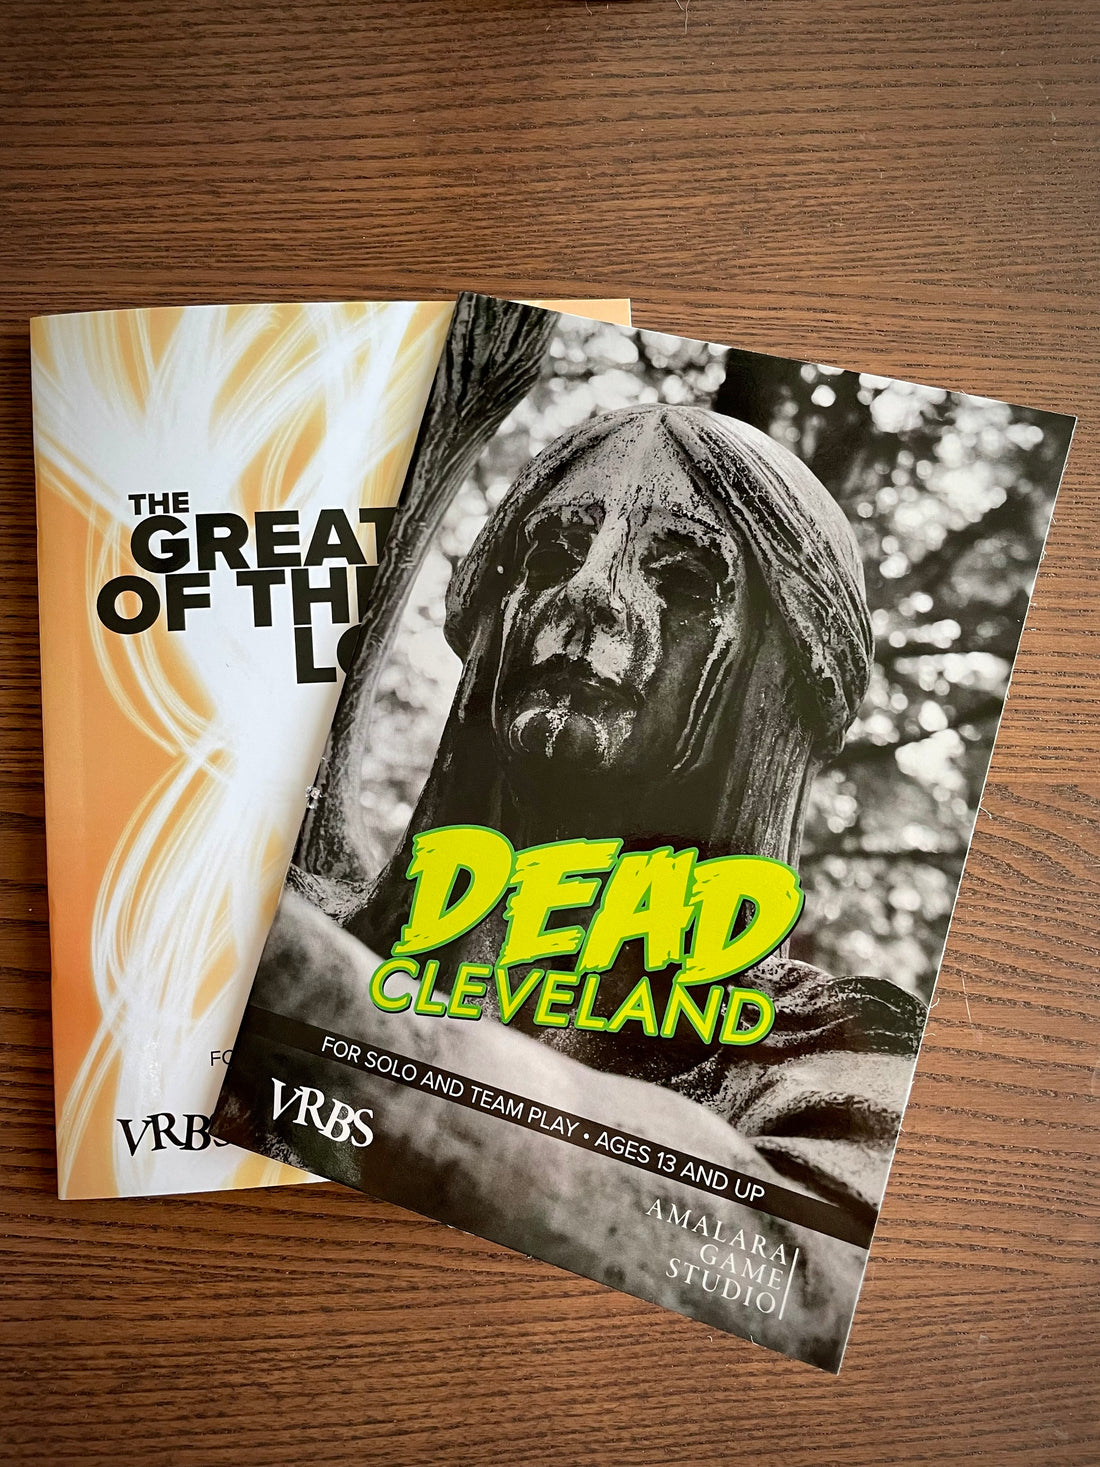 Print versions of "The Greatest of These is Love" and "Dead Cleveland" are now in stock.